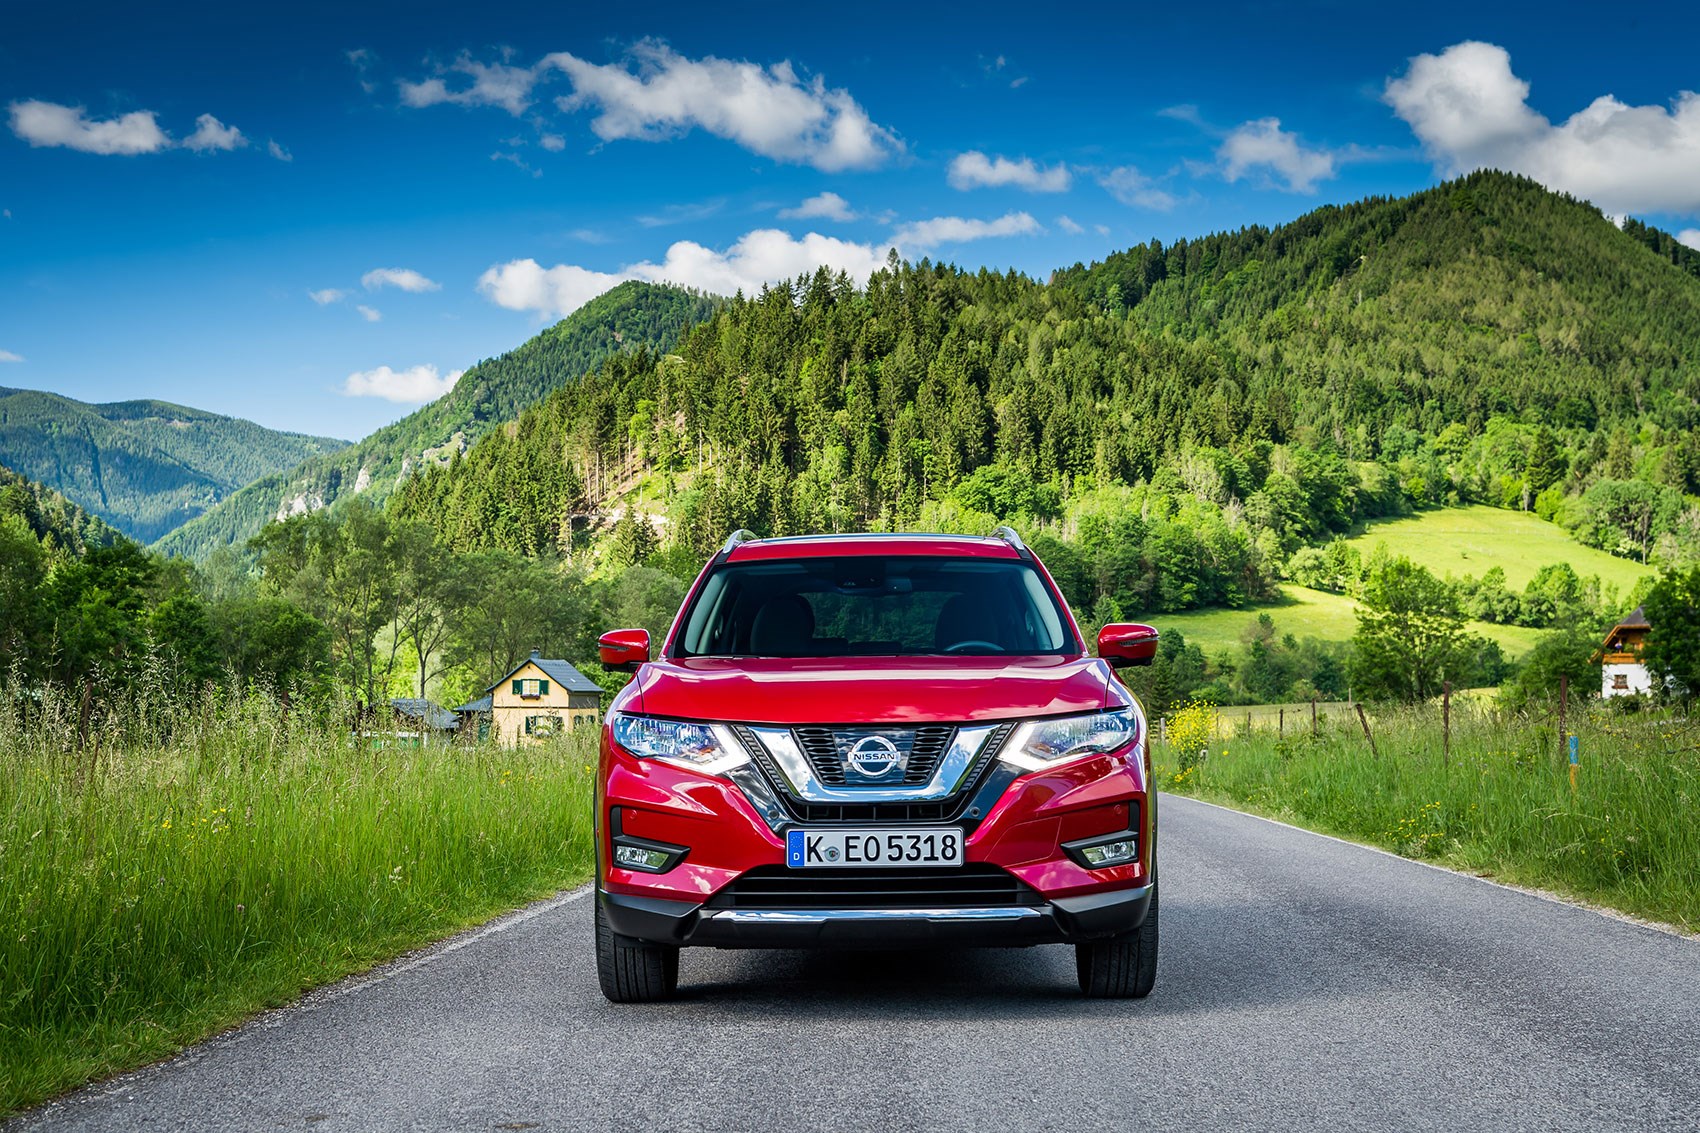 2018 Nissan X Trail Review | Future Cars Release Date